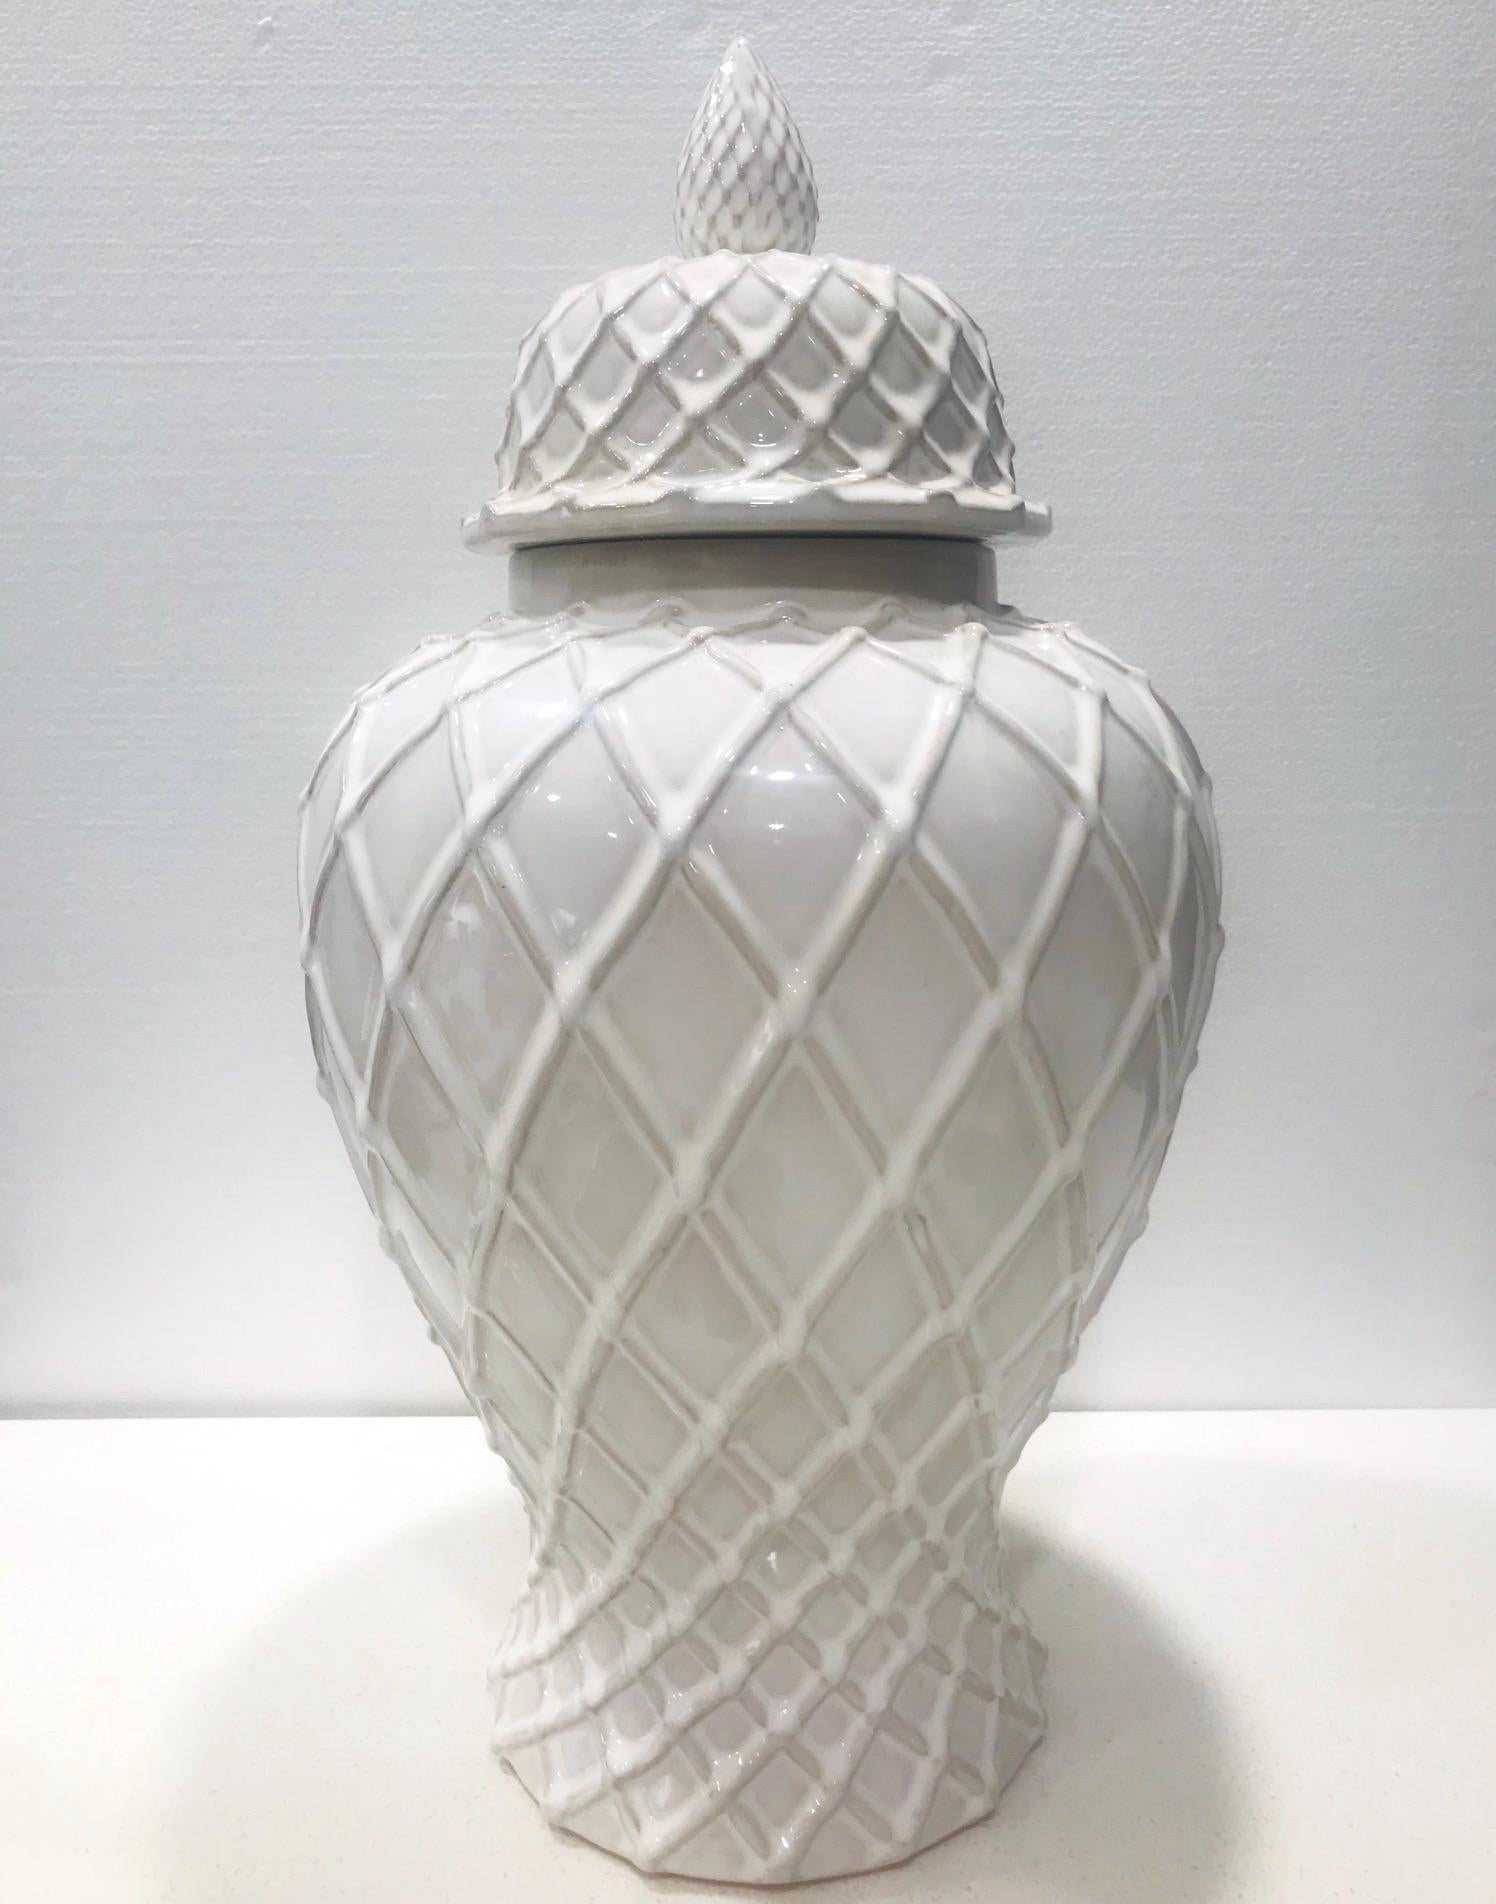 Hollywood Regency large blanc de chine lidded ginger jar with a white glaze finish. Handmade pottery vase has the form of an urn with Chippendale style lattice designs throughout. The jar features a tapered base while the lid is adorned with a